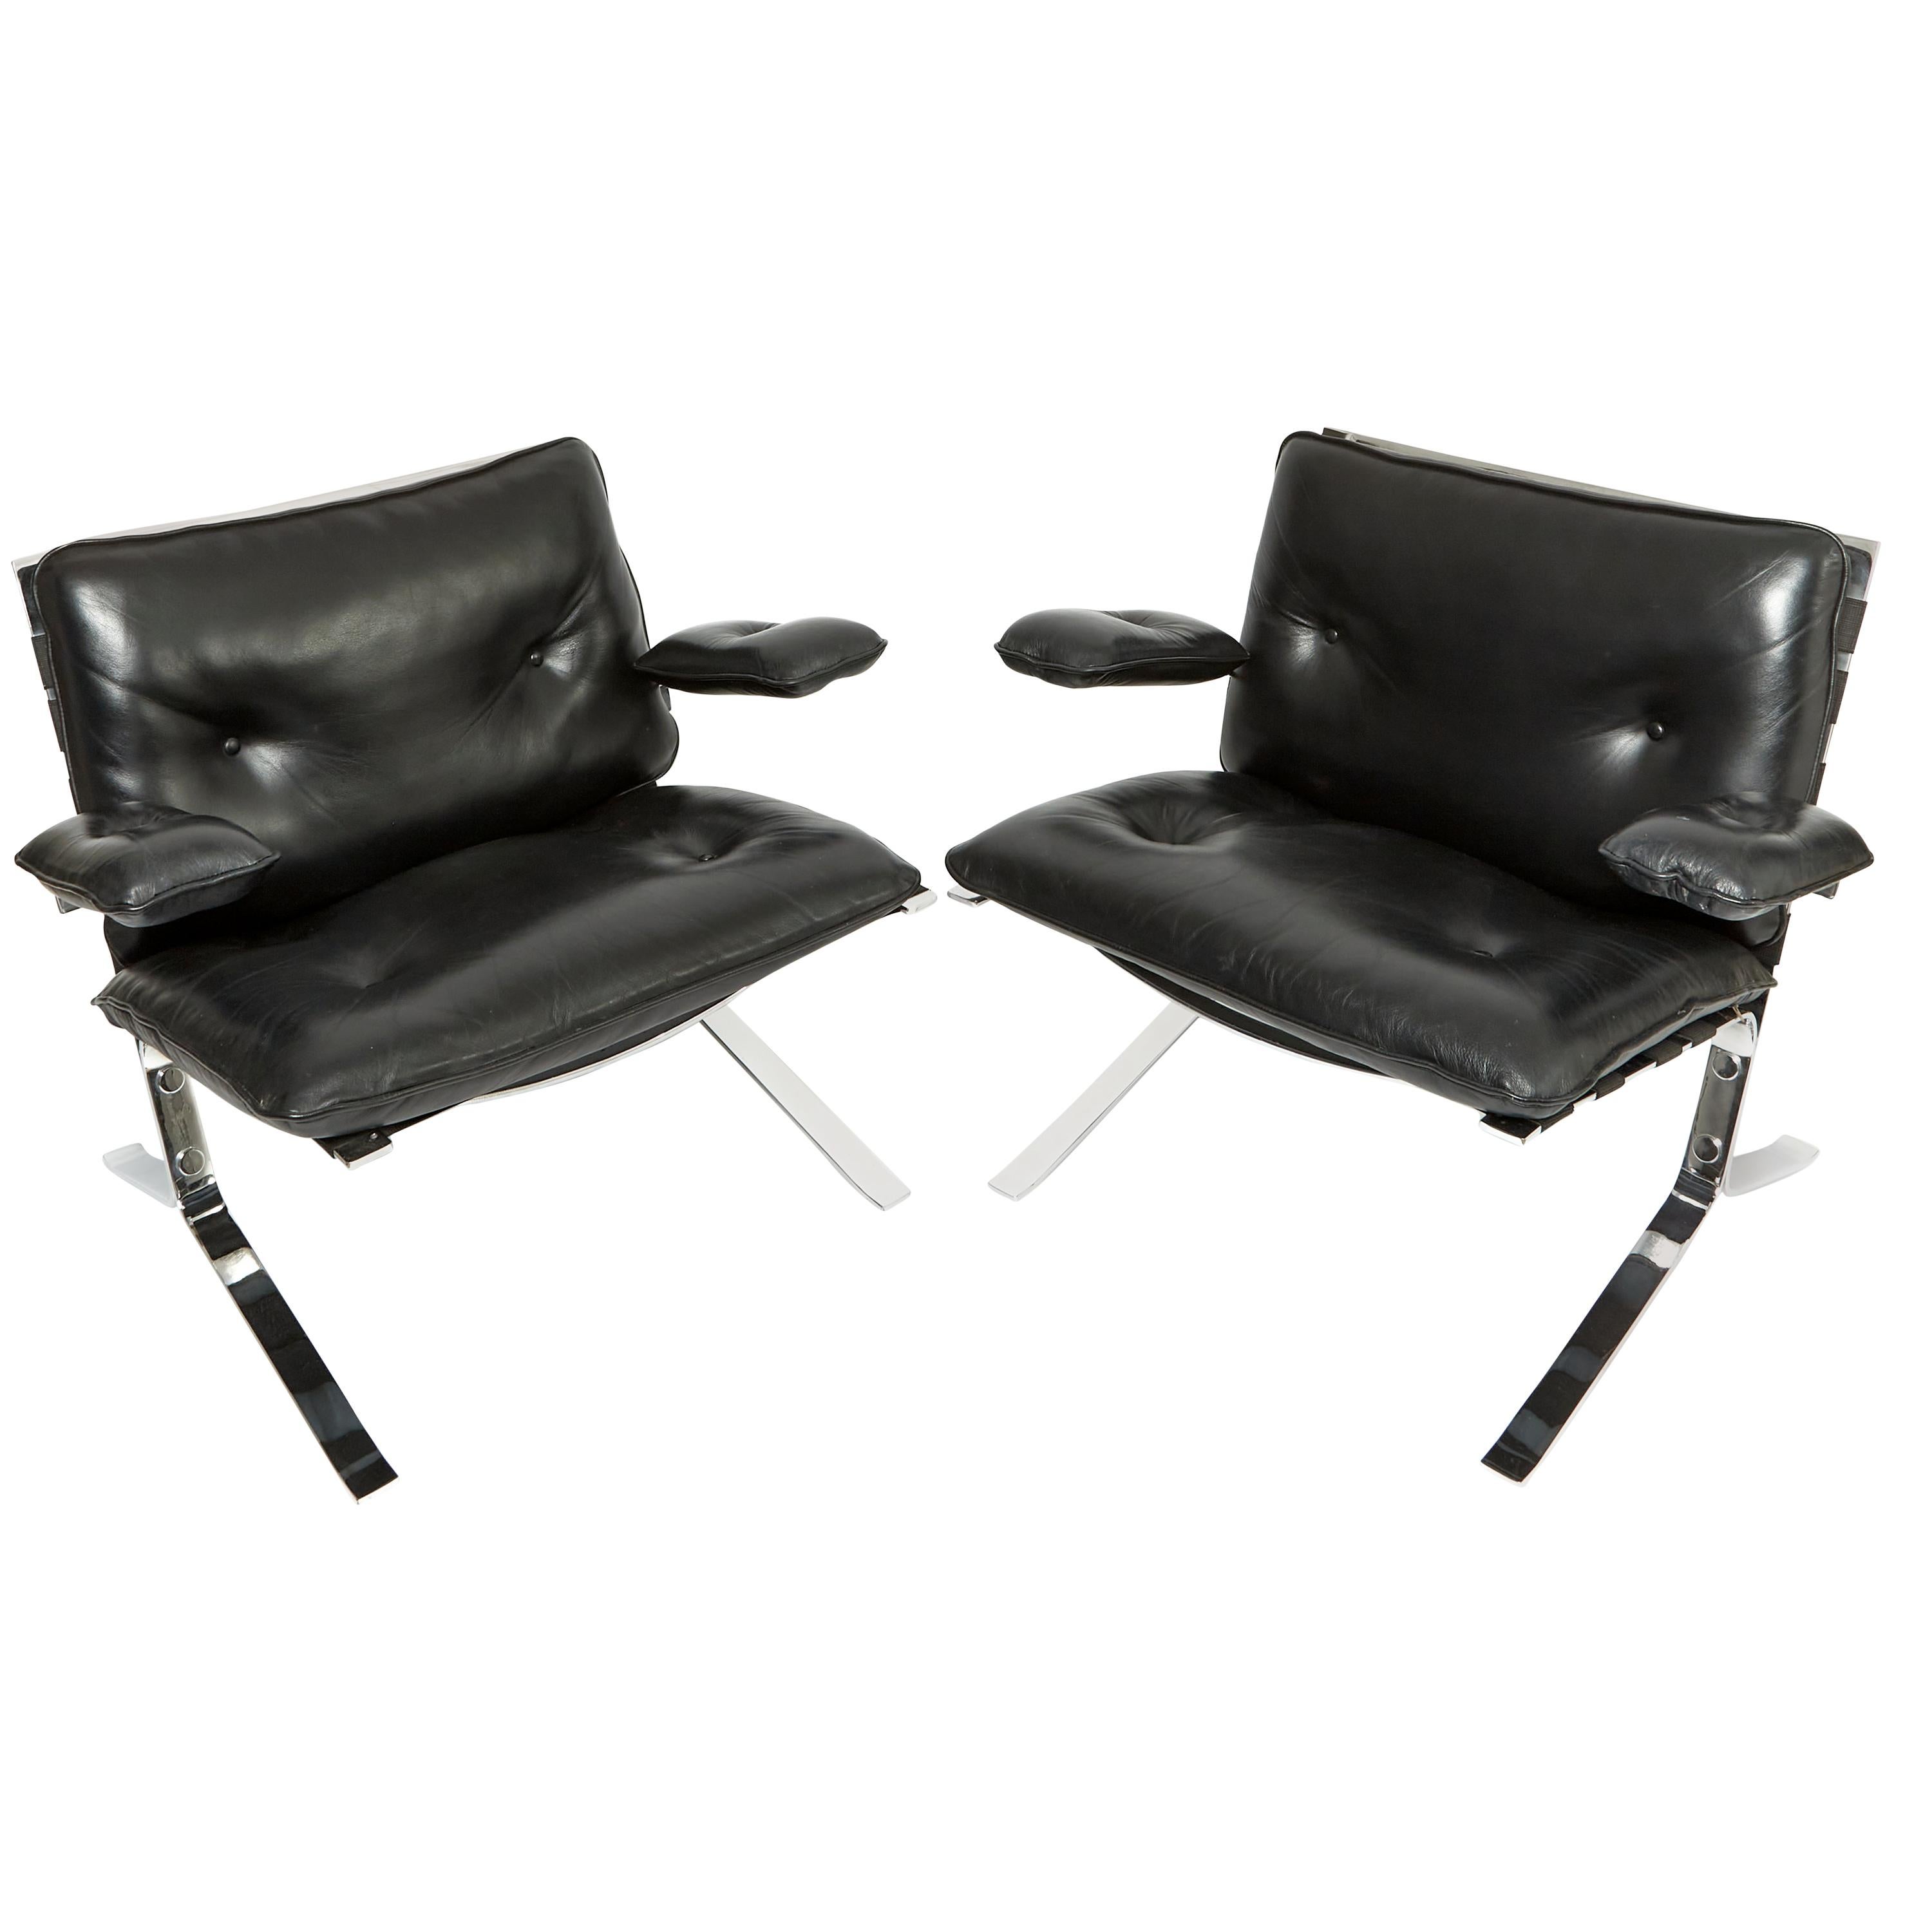 Pair of Late 20th Century black Leather and Chrome Chairs